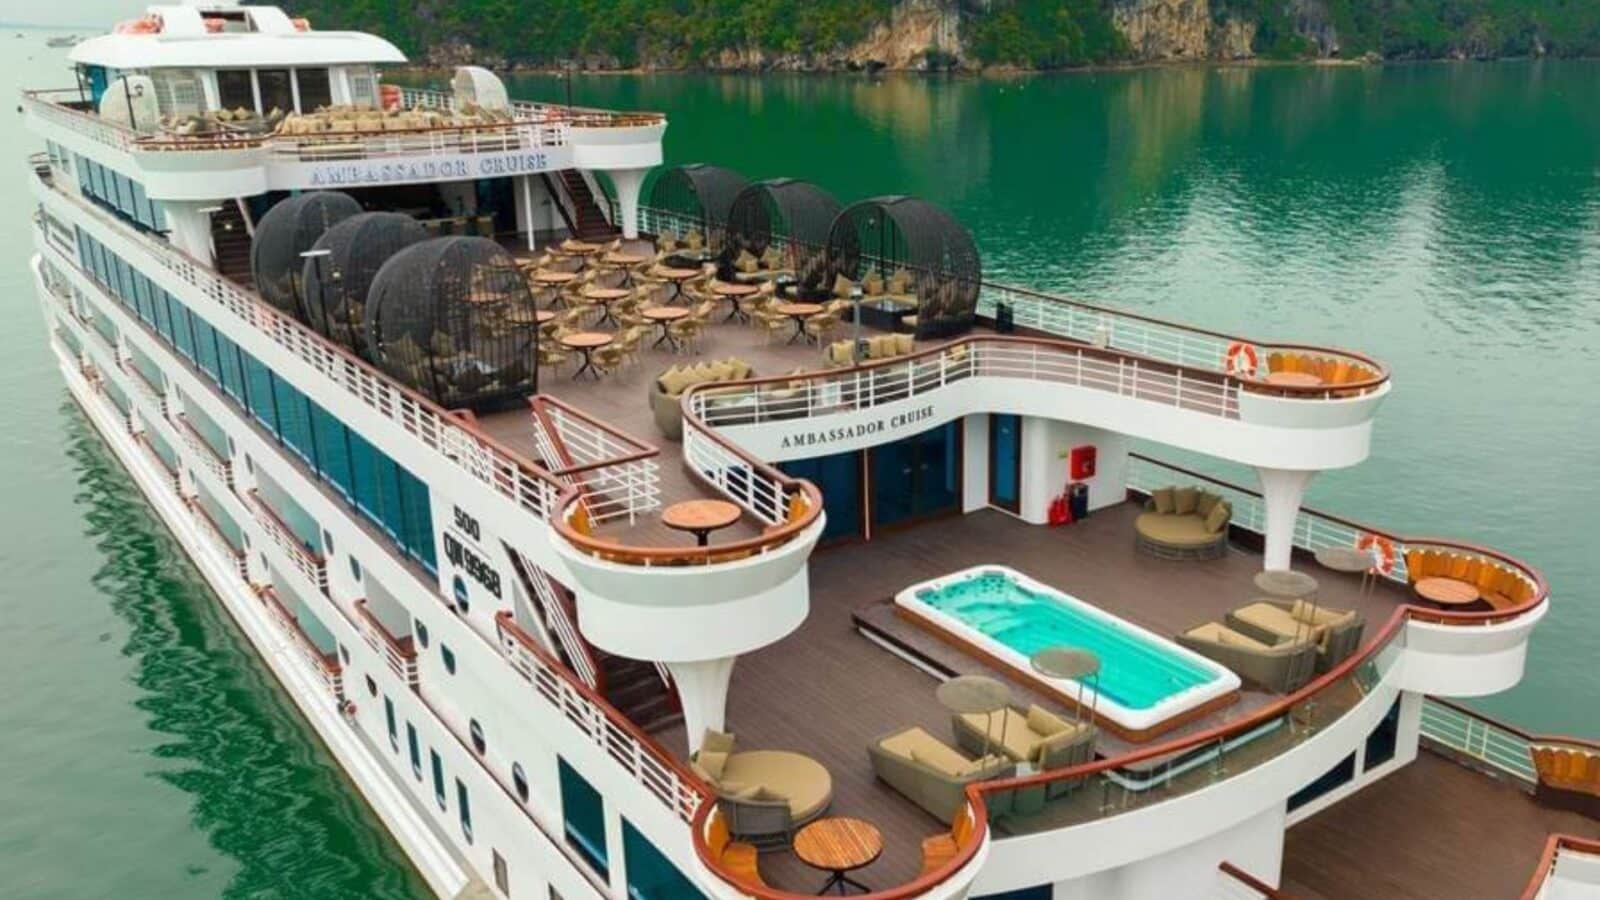 view of Ambassador Cruise ship on Halong Bay in Vietnam, with upper decks visible